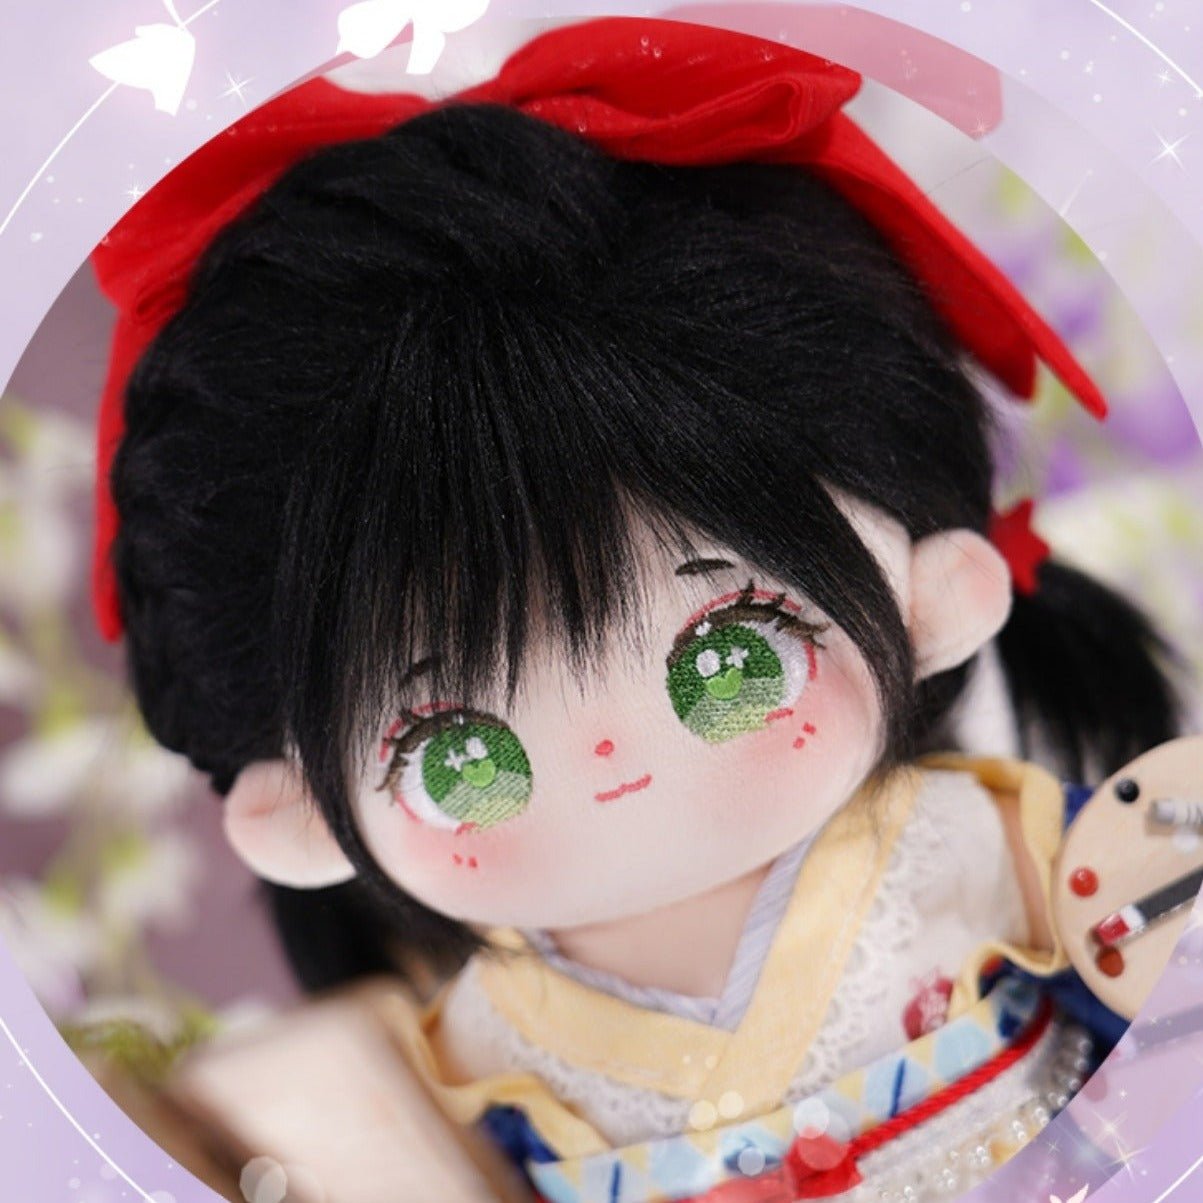 Classic Snow White Cotton Doll And Doll Clothes - TOY-PLU-43401 - omodoki - 42shops